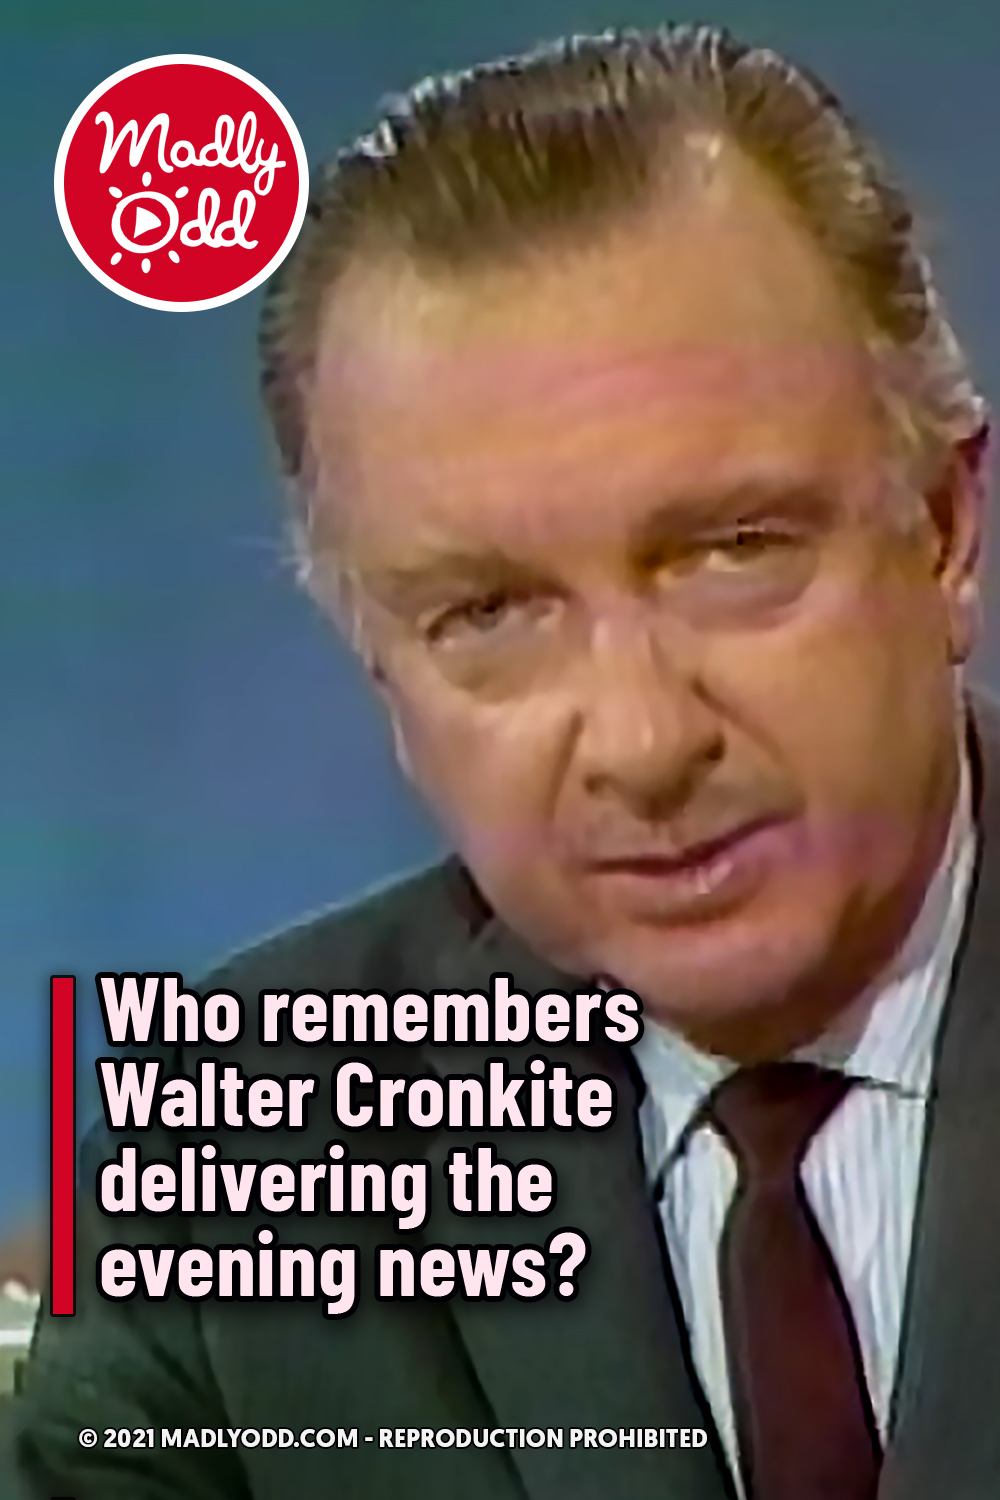 Who remembers Walter Cronkite delivering the evening news?